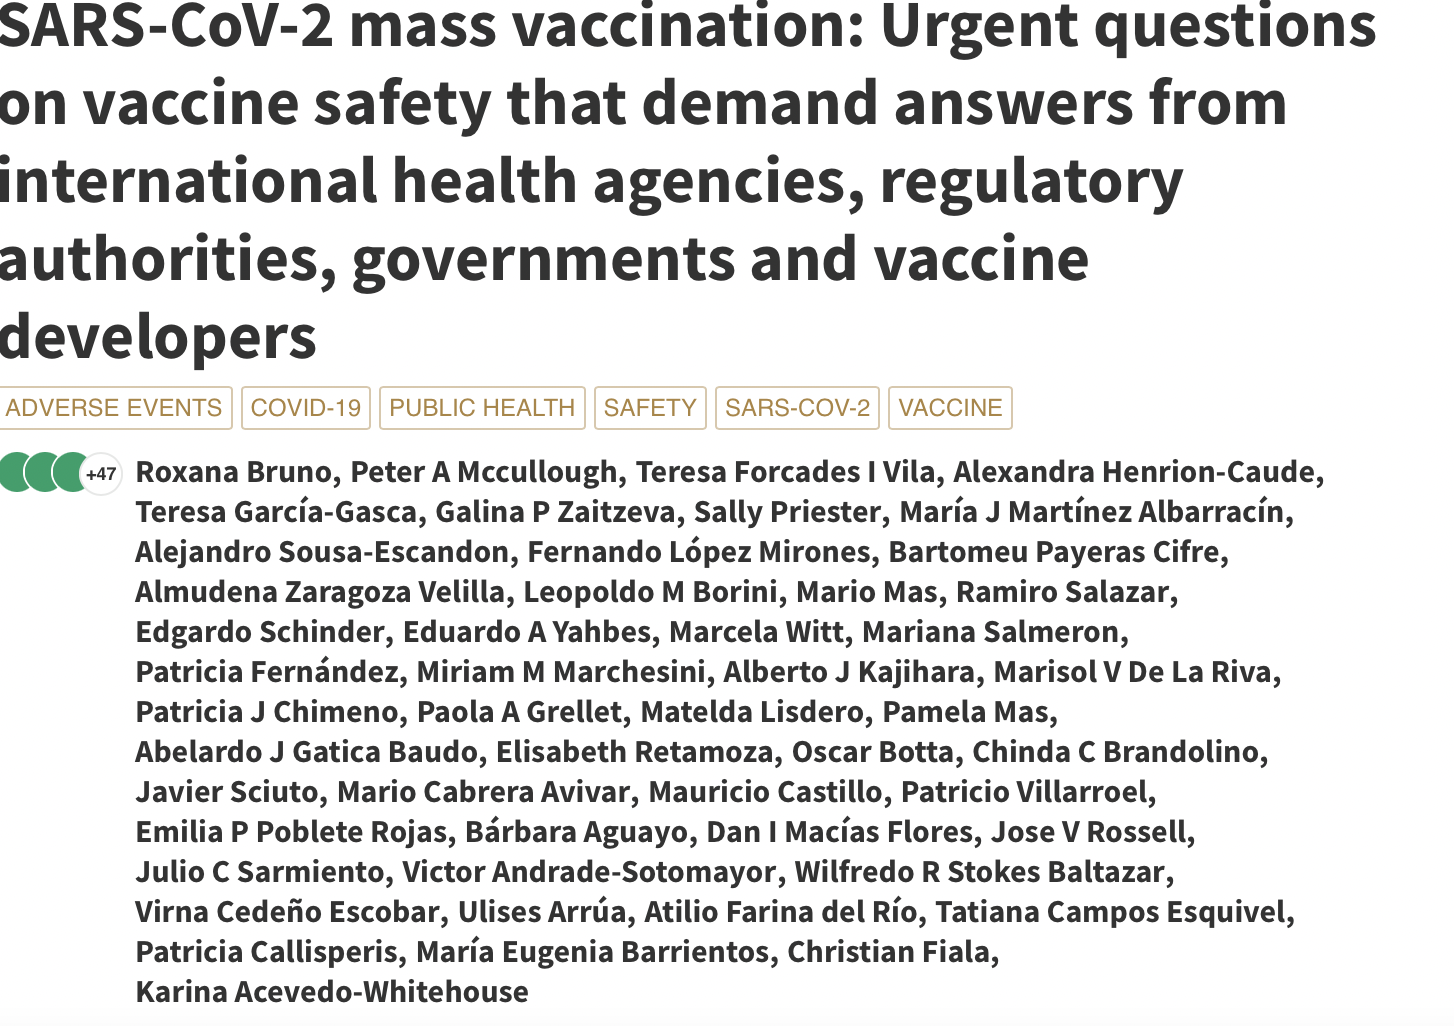 57 Top Scientists and Doctors Release Shocking Study on COVID Vaccines and Demand Immediate Stop to All Vaccinations Screen-Shot-2021-06-03-at-08.42.44